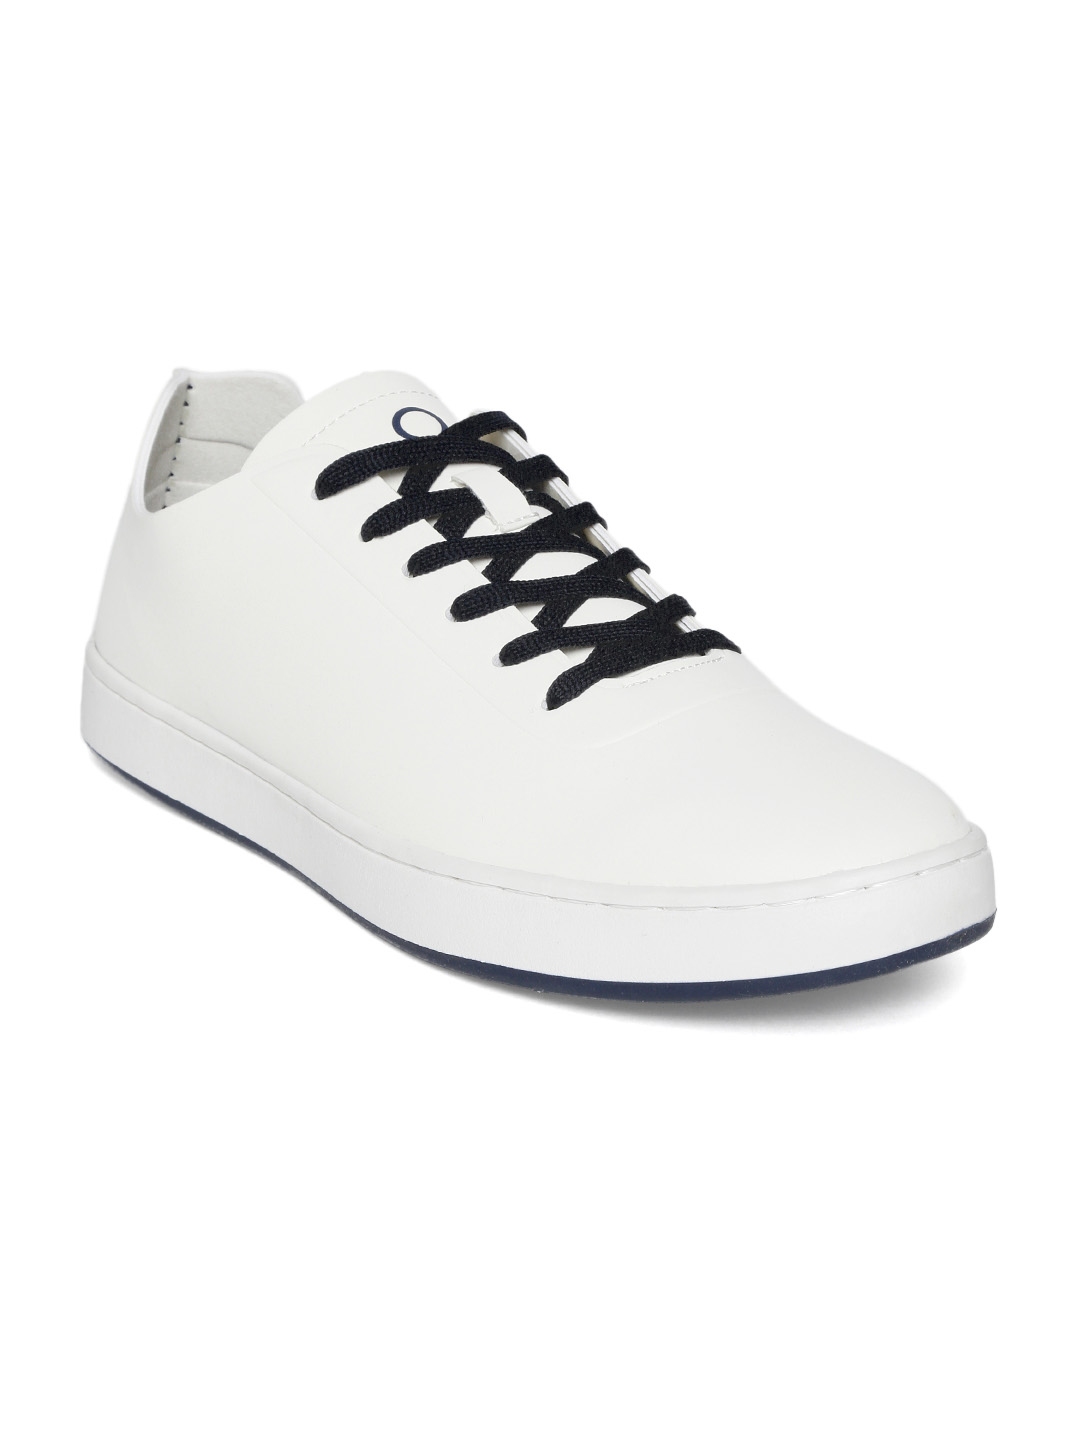 united colors of benetton men white sneakers